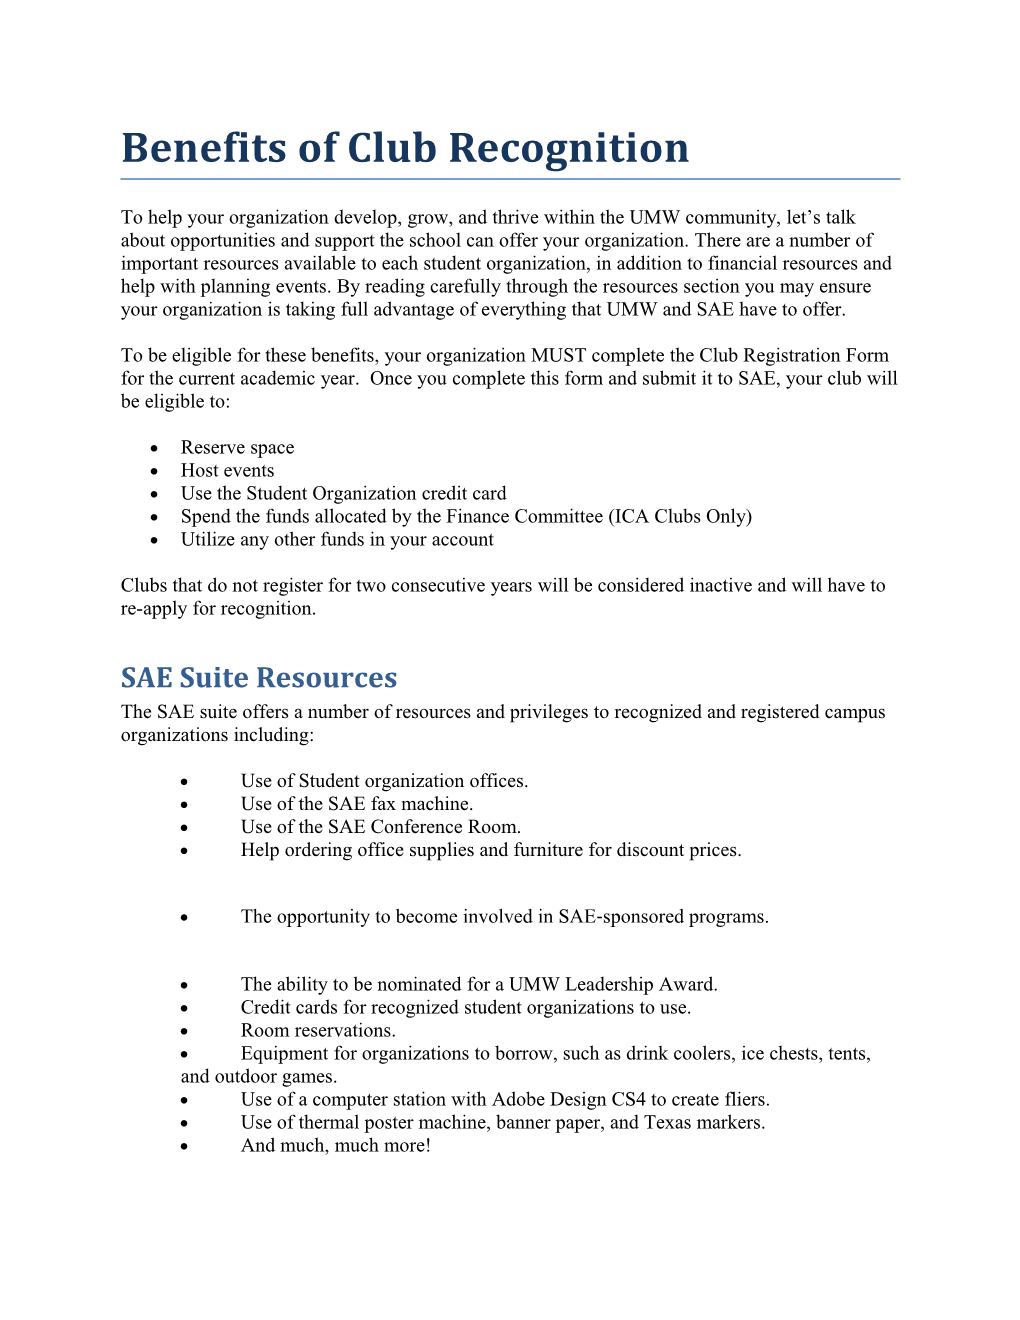 Benefits of Club Recognition